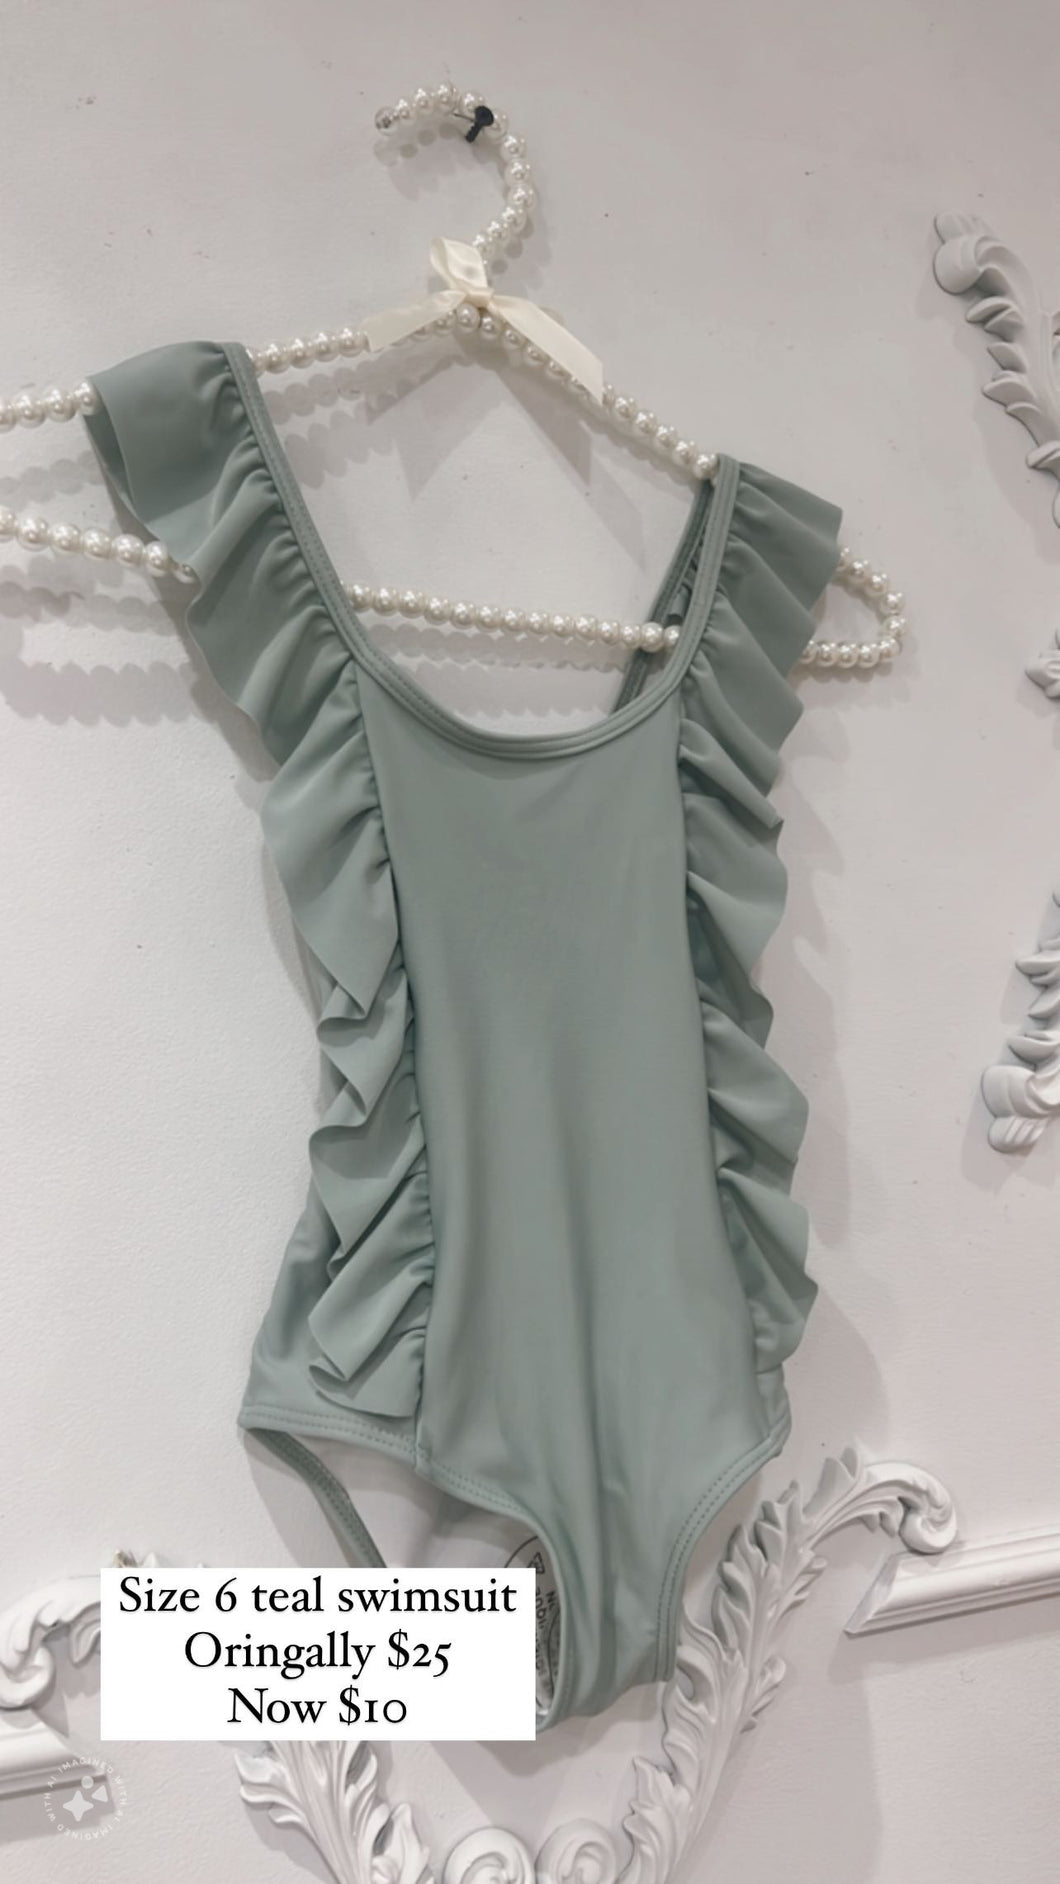 Teal swimsuit size 6